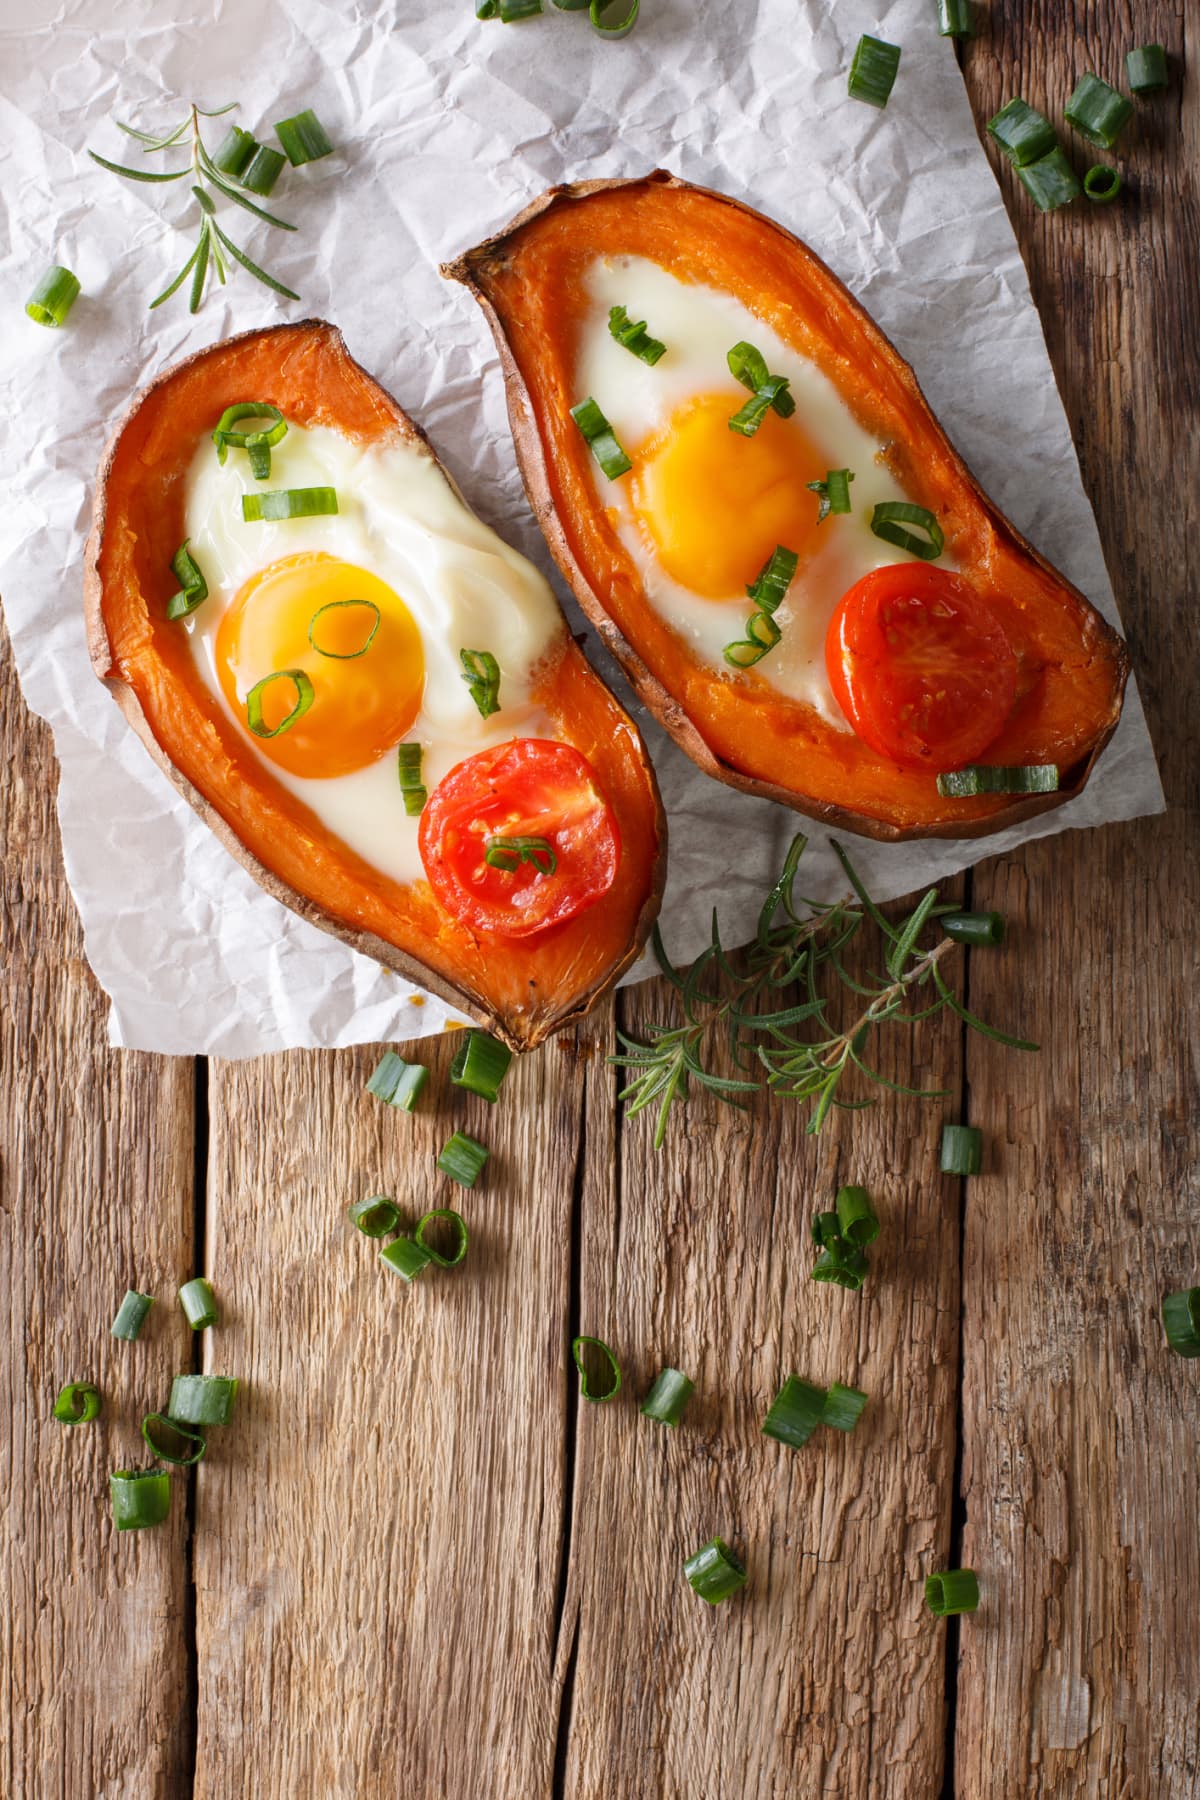 Baked sweet potato stuffed with egg and tomato.